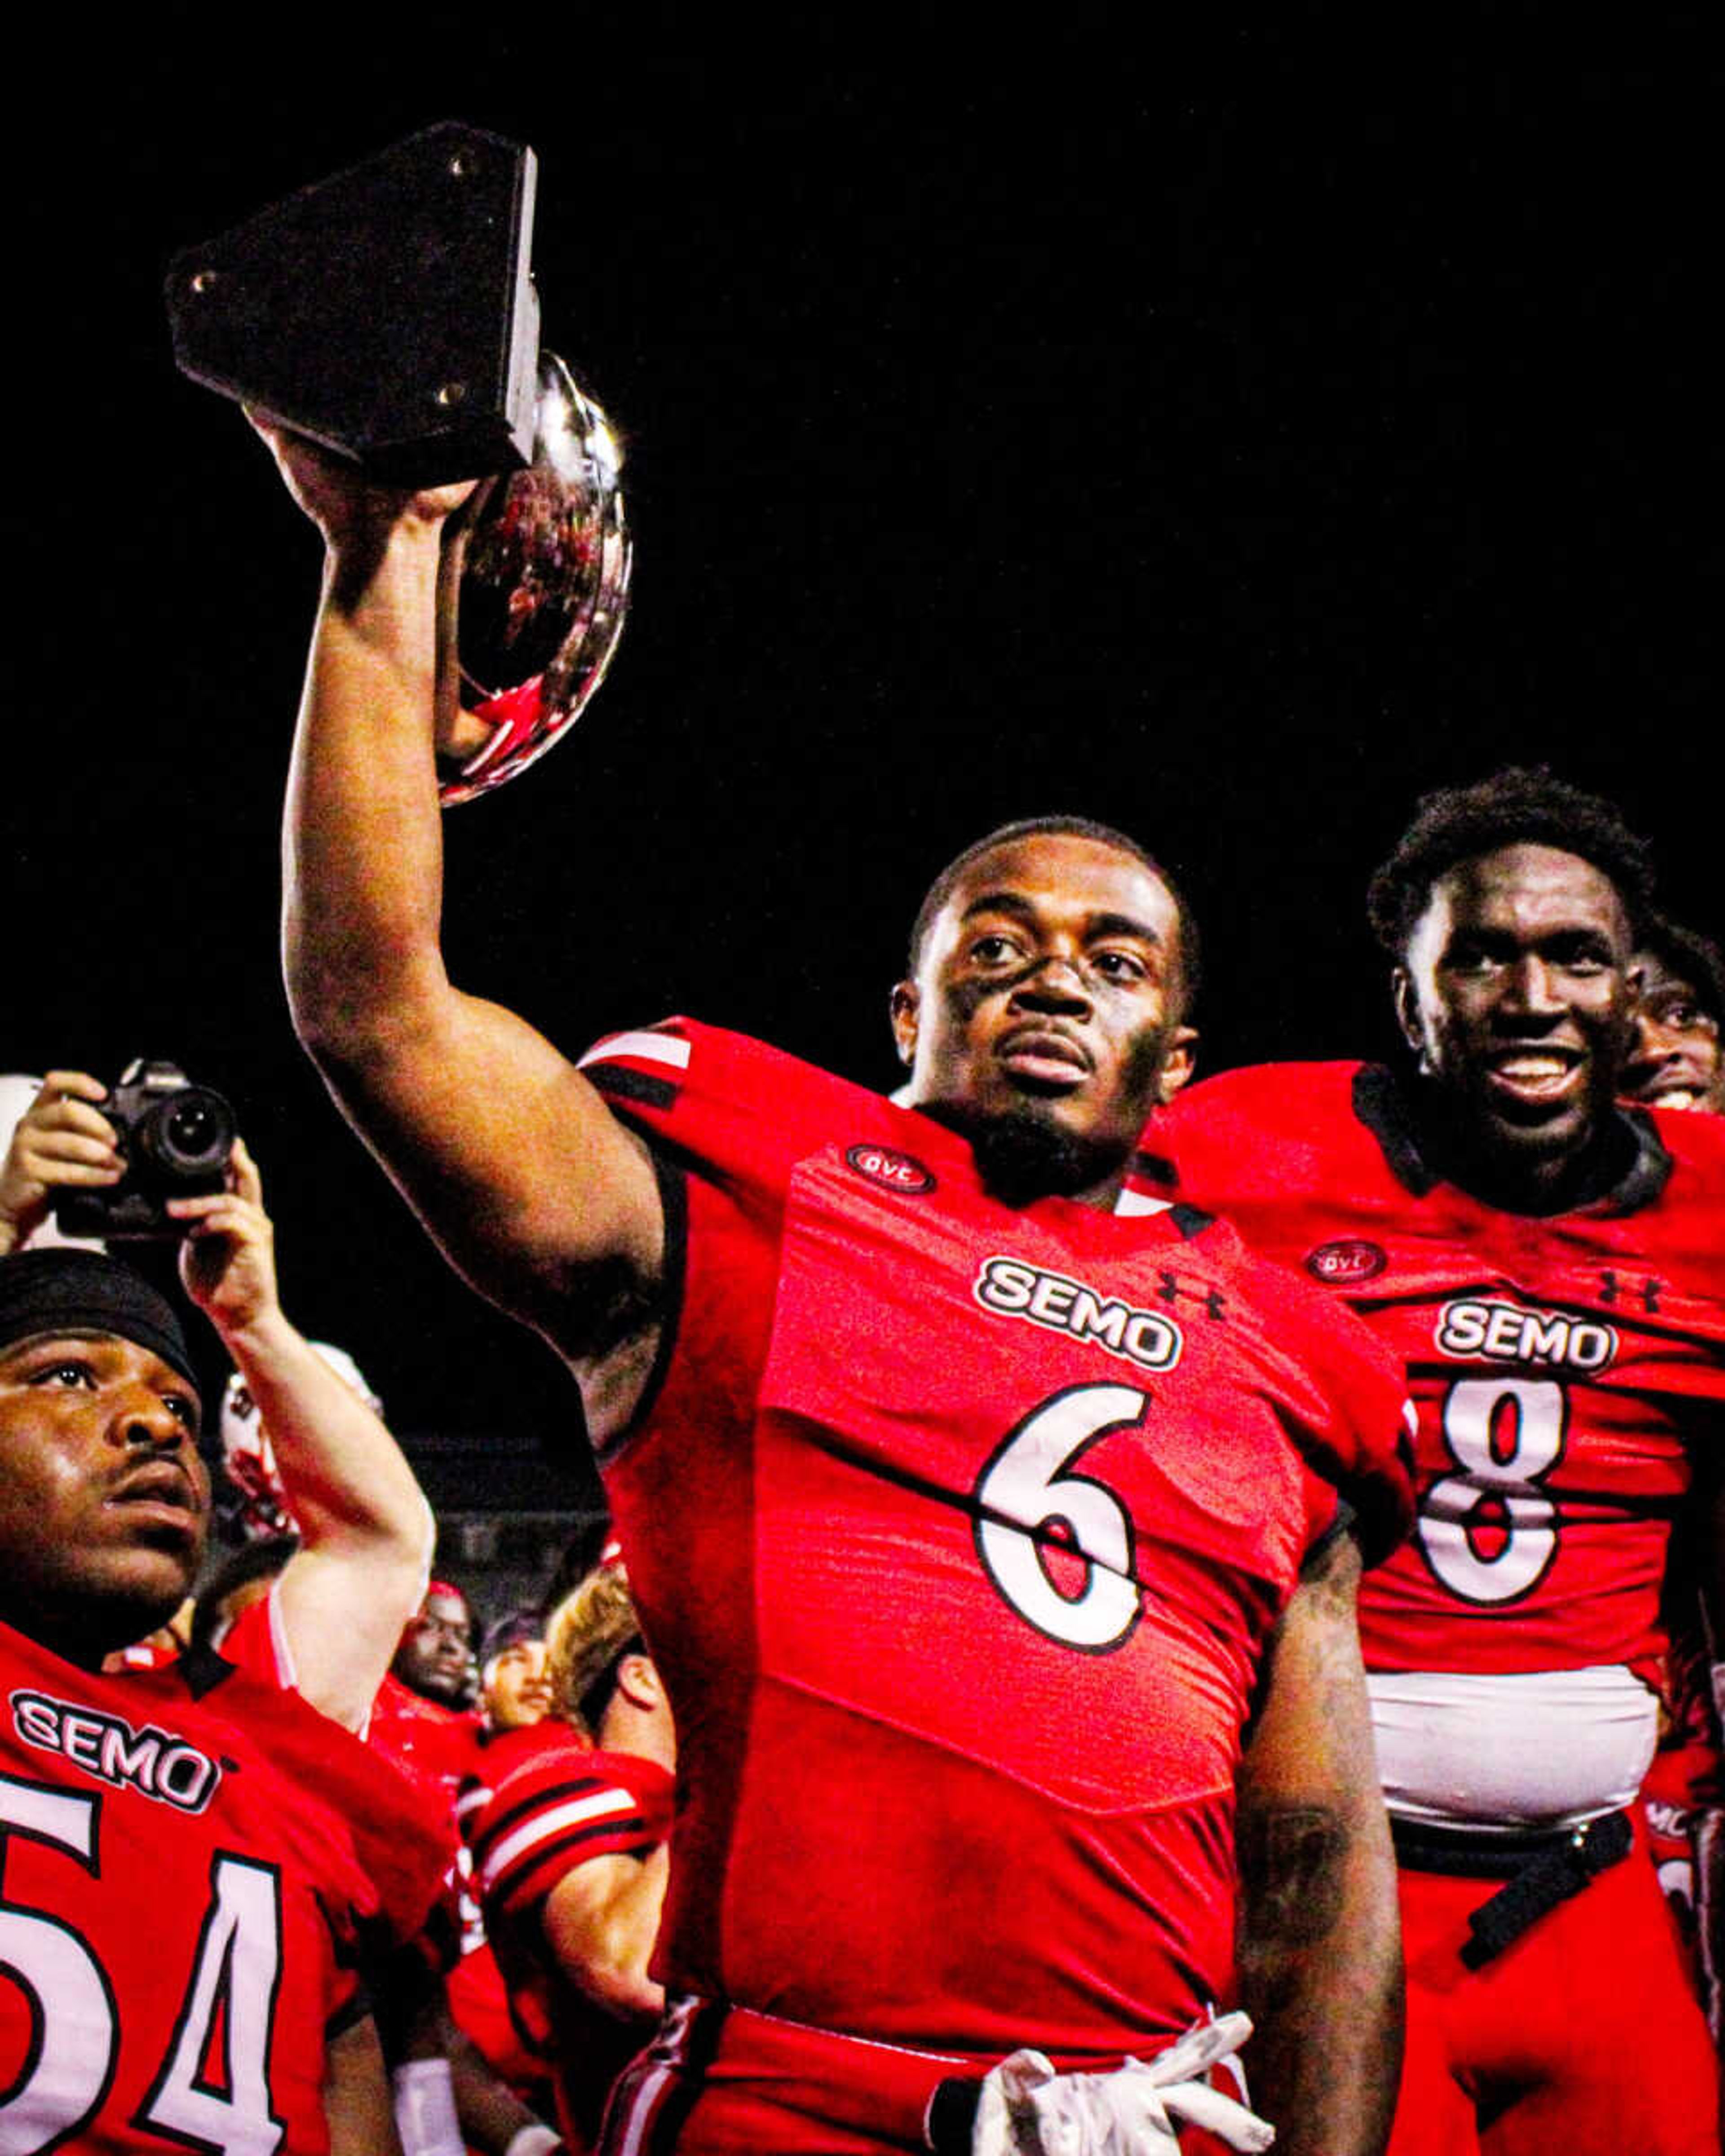 Running back Geno Hess hoists the Gameball Brawl trophy after SEMO’s 45-7 victory against Lindenwood University. Hess ended the game with 115 rushing yards and 2 touchdowns.